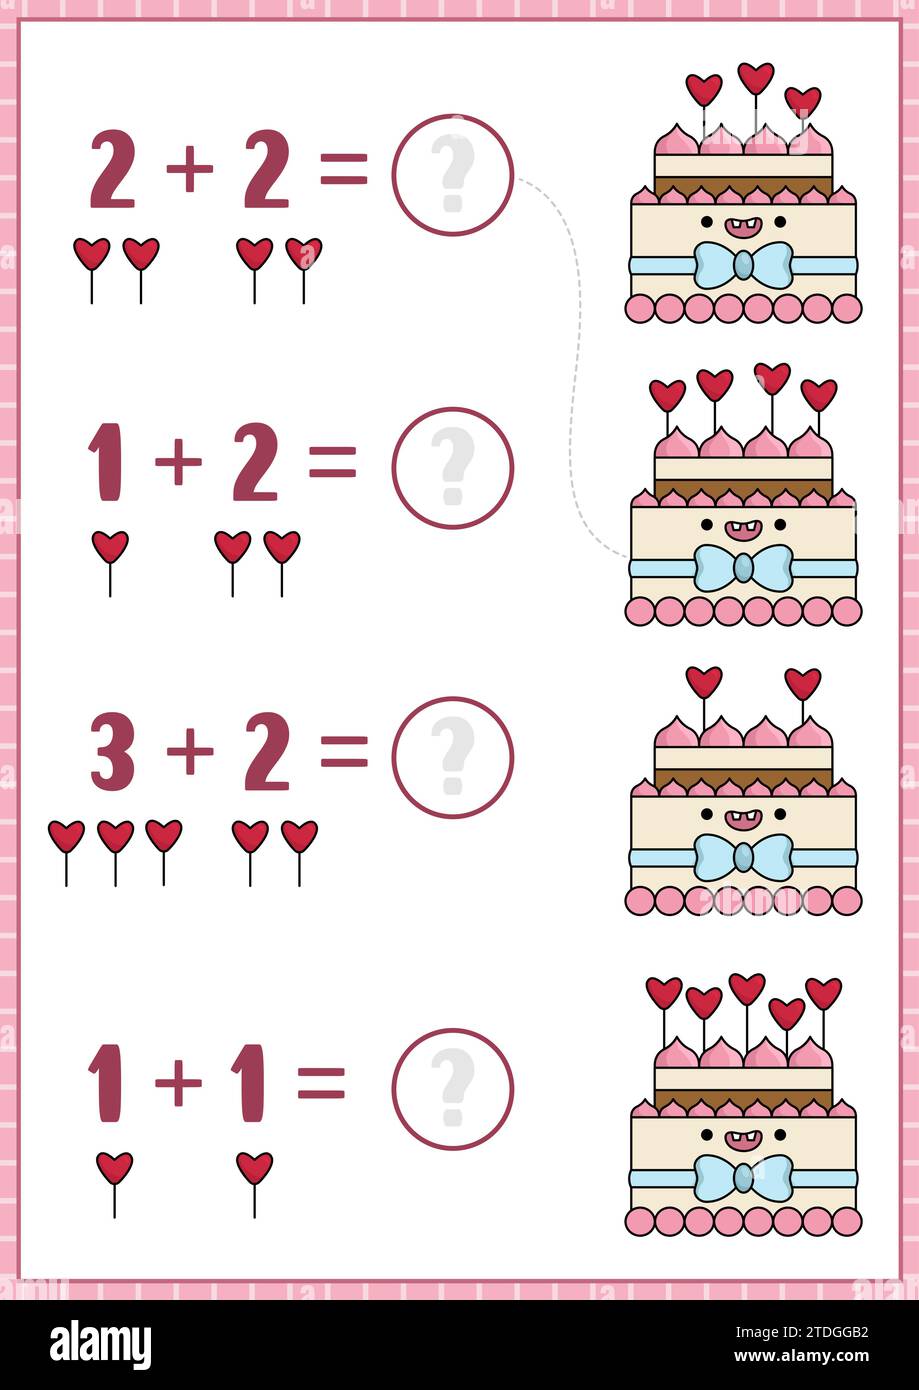 https://c8.alamy.com/comp/2TDGGB2/saint-valentine-counting-and-matching-game-with-kawaii-cake-with-hearts-on-sticks-love-holiday-math-activity-for-preschool-kids-educational-printabl-2TDGGB2.jpg